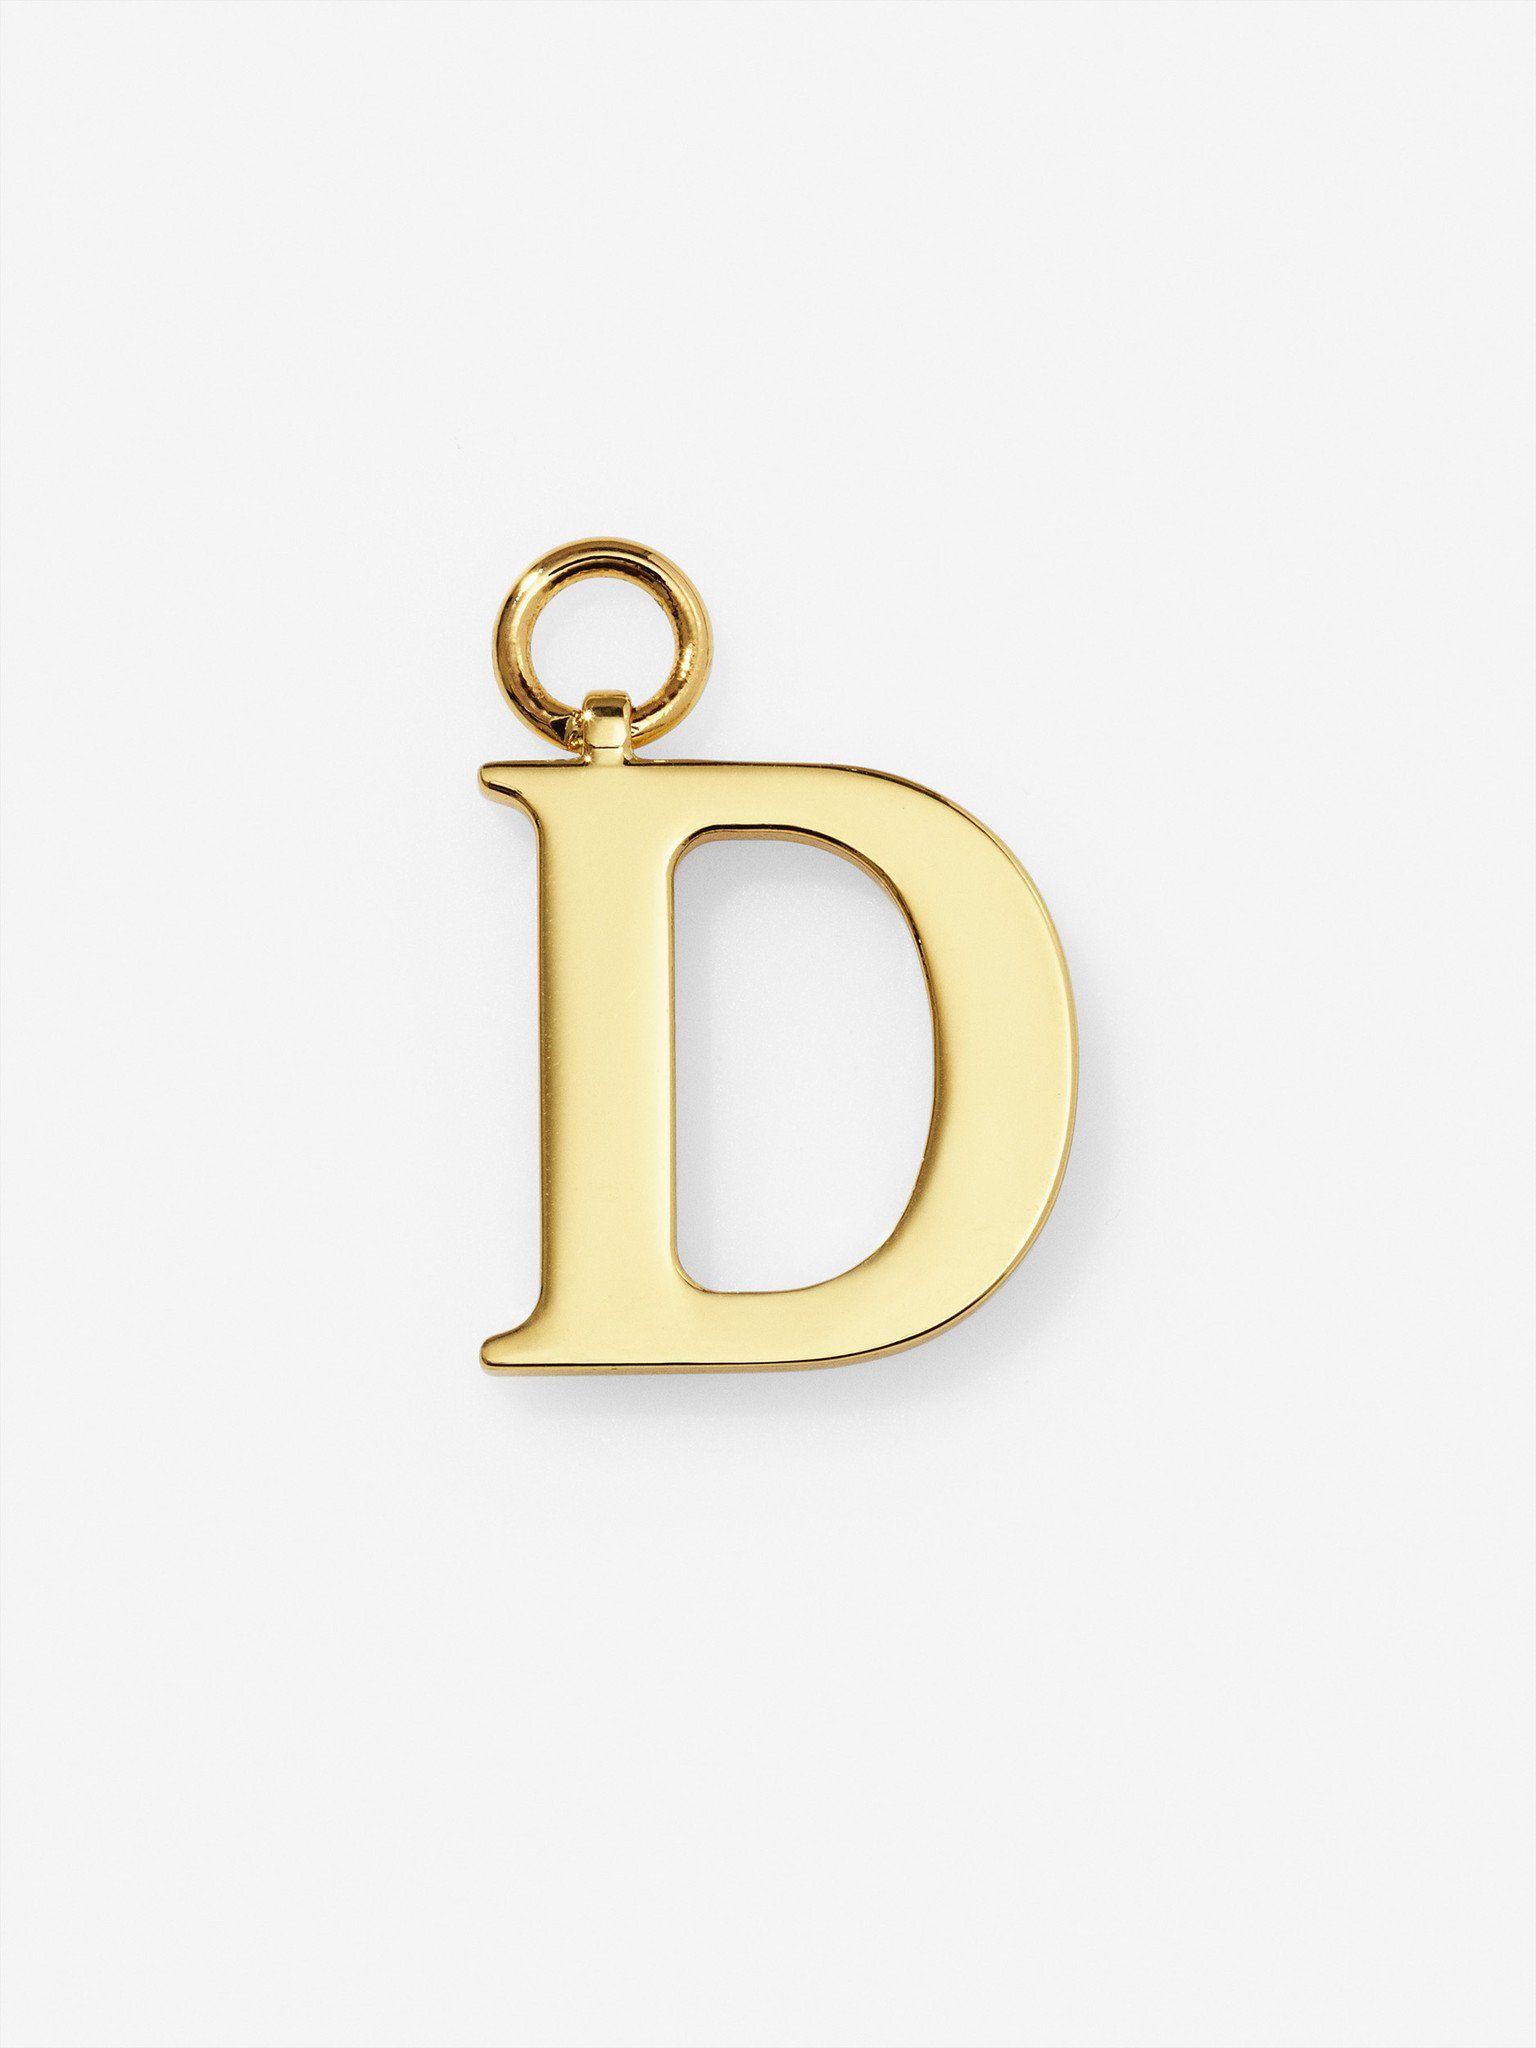 Gold D Logo - Gold Plated Letter D Charm